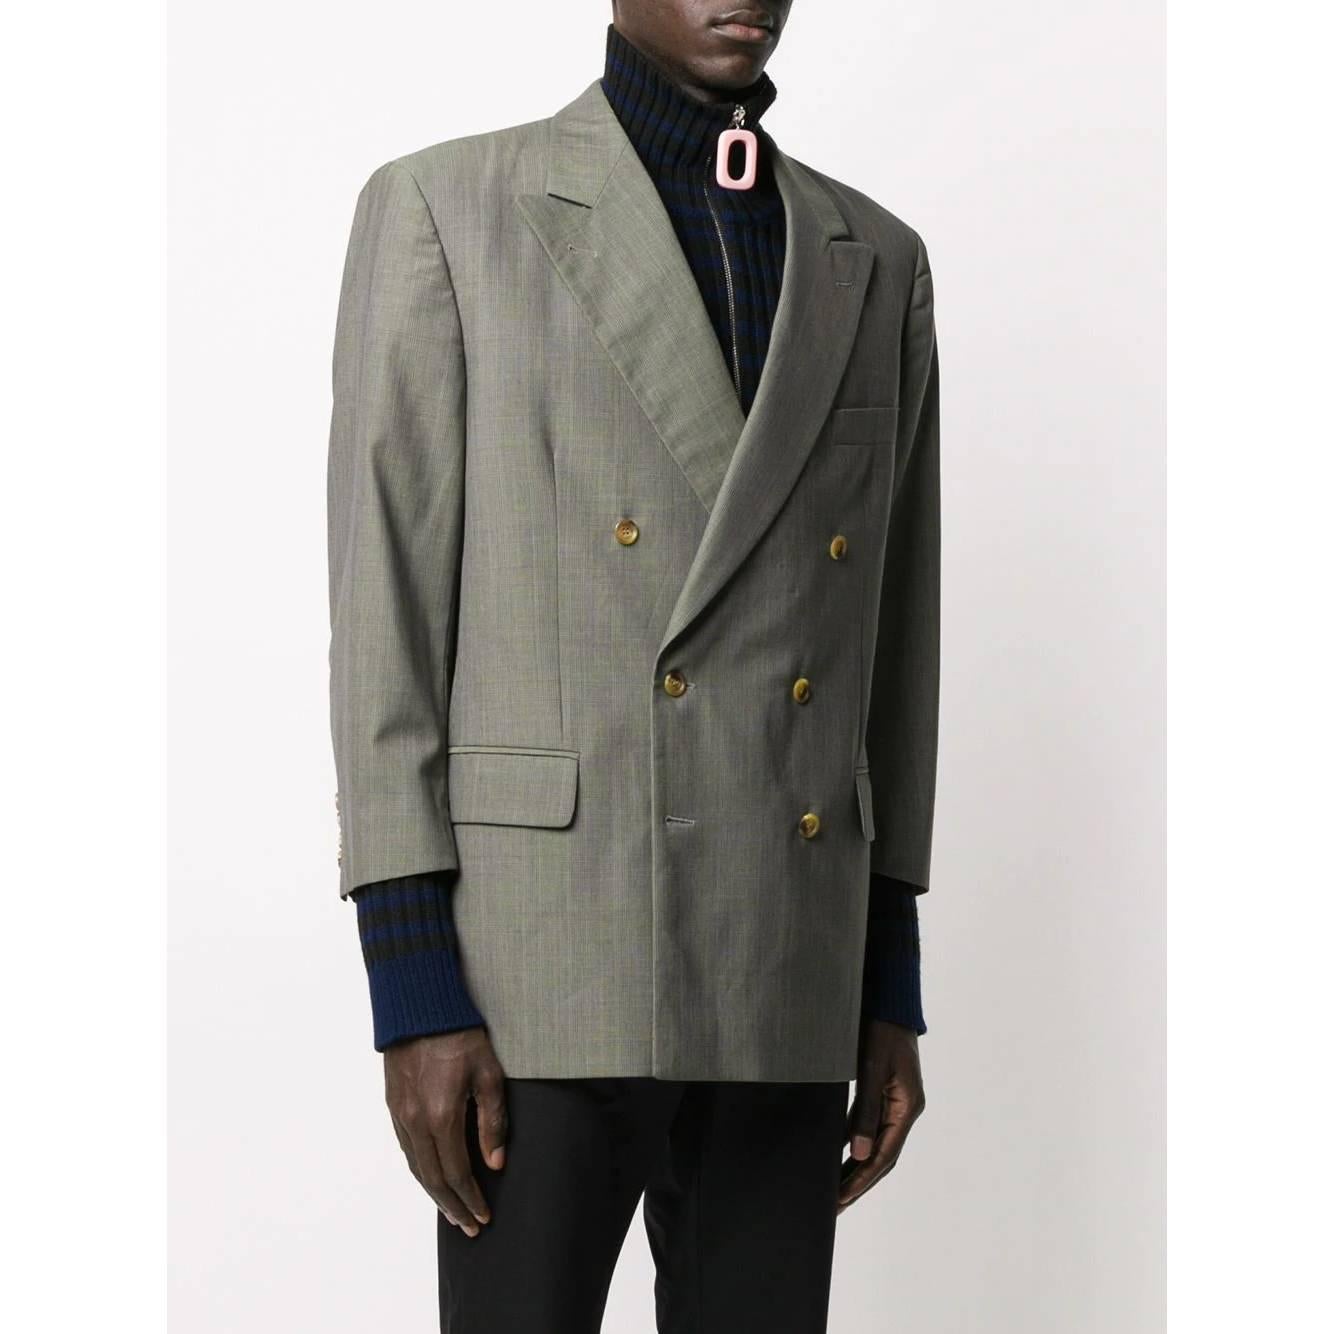 Burberry grey-green virgin wool jacket with Prince of Wales pattern. Classic collar with peak lapels, double-breasted front closure with buttons. Three-quarter sleeves, lightly padded shoulders, buttoned cuffs, a breast pocket and two front flap